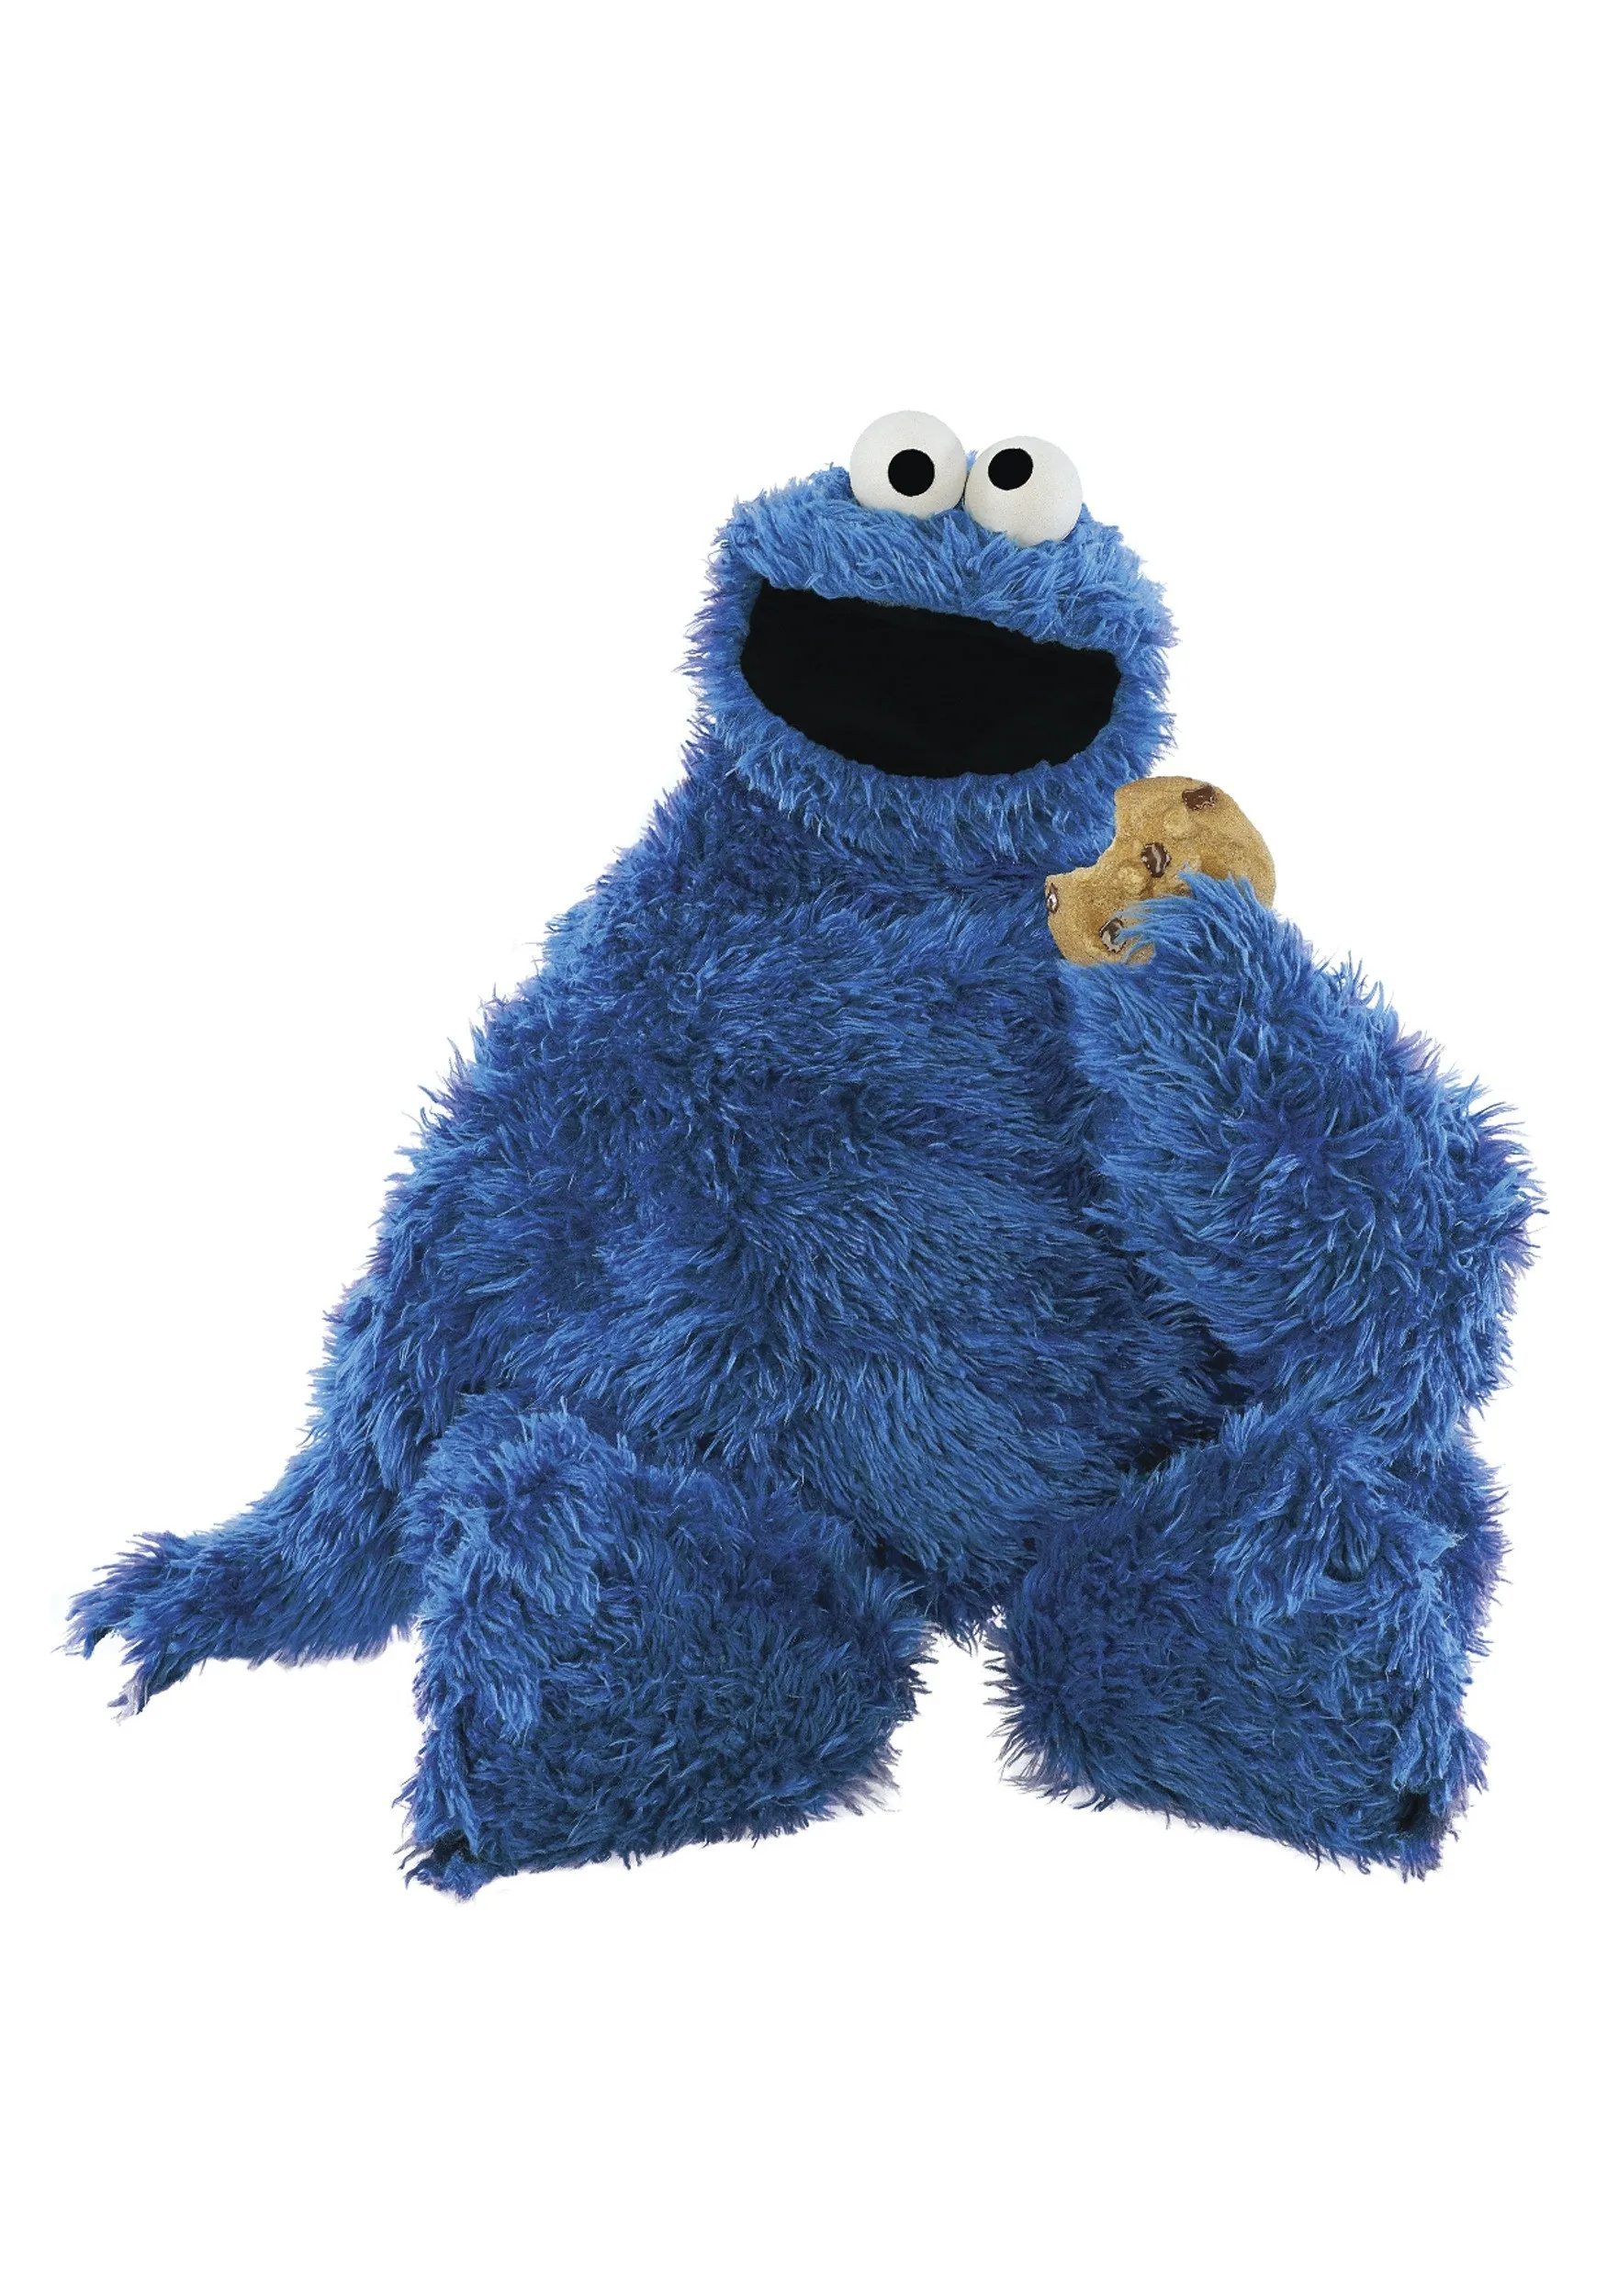 Cute Cookie Monster, Adorable wallpaper, Delightful design, Charming character, 1750x2500 HD Phone